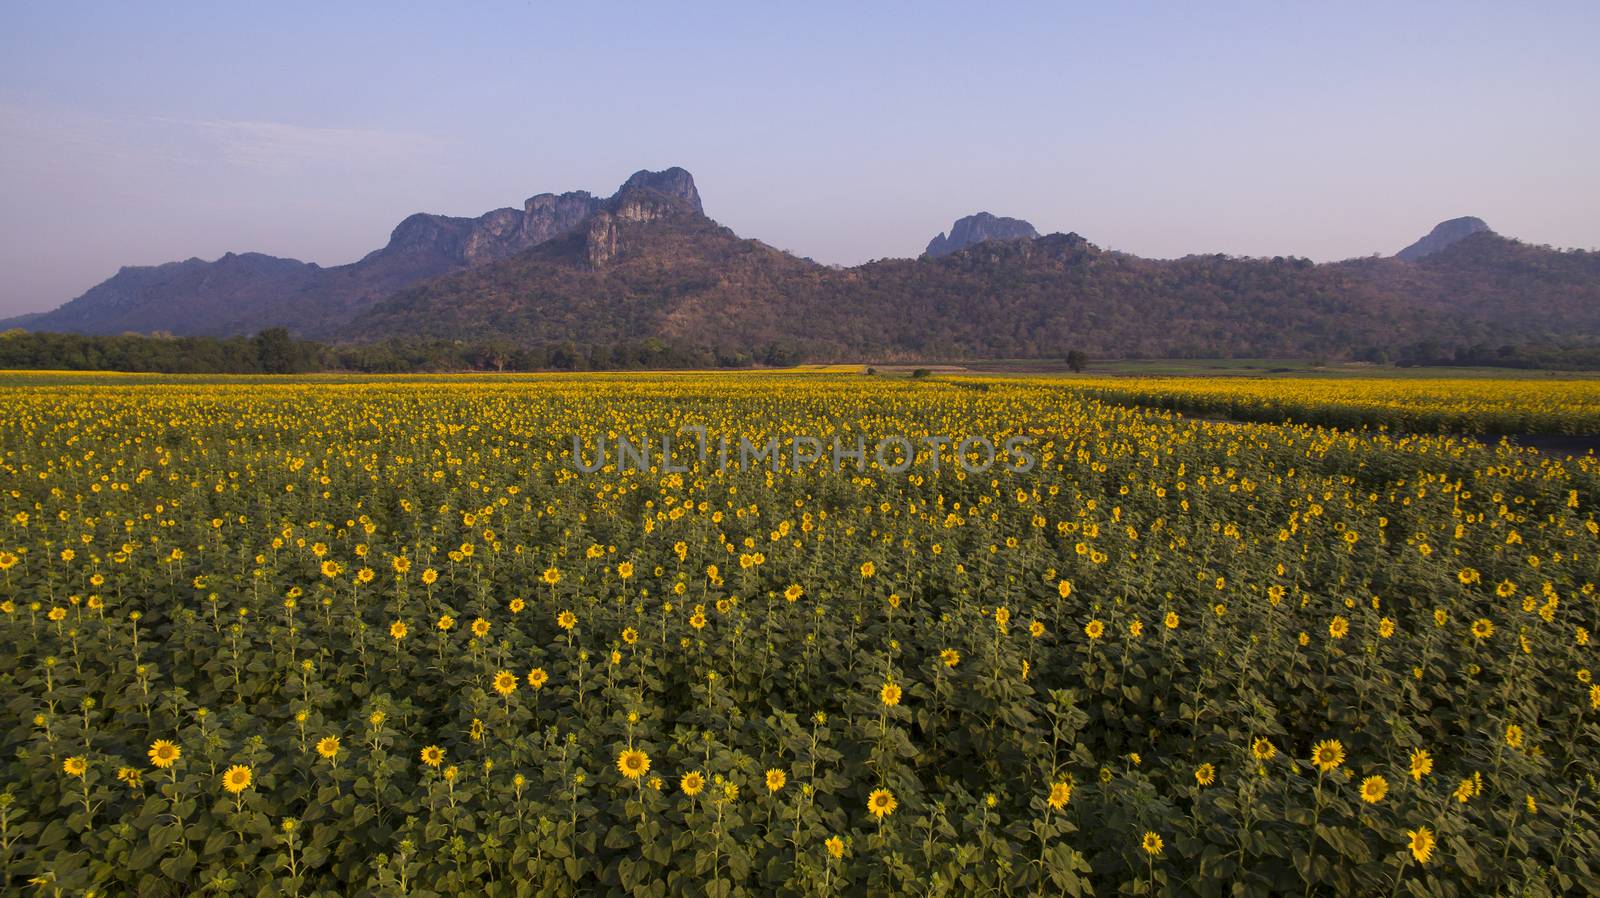 aerial view of sunflowers field and mountain background by khunaspix